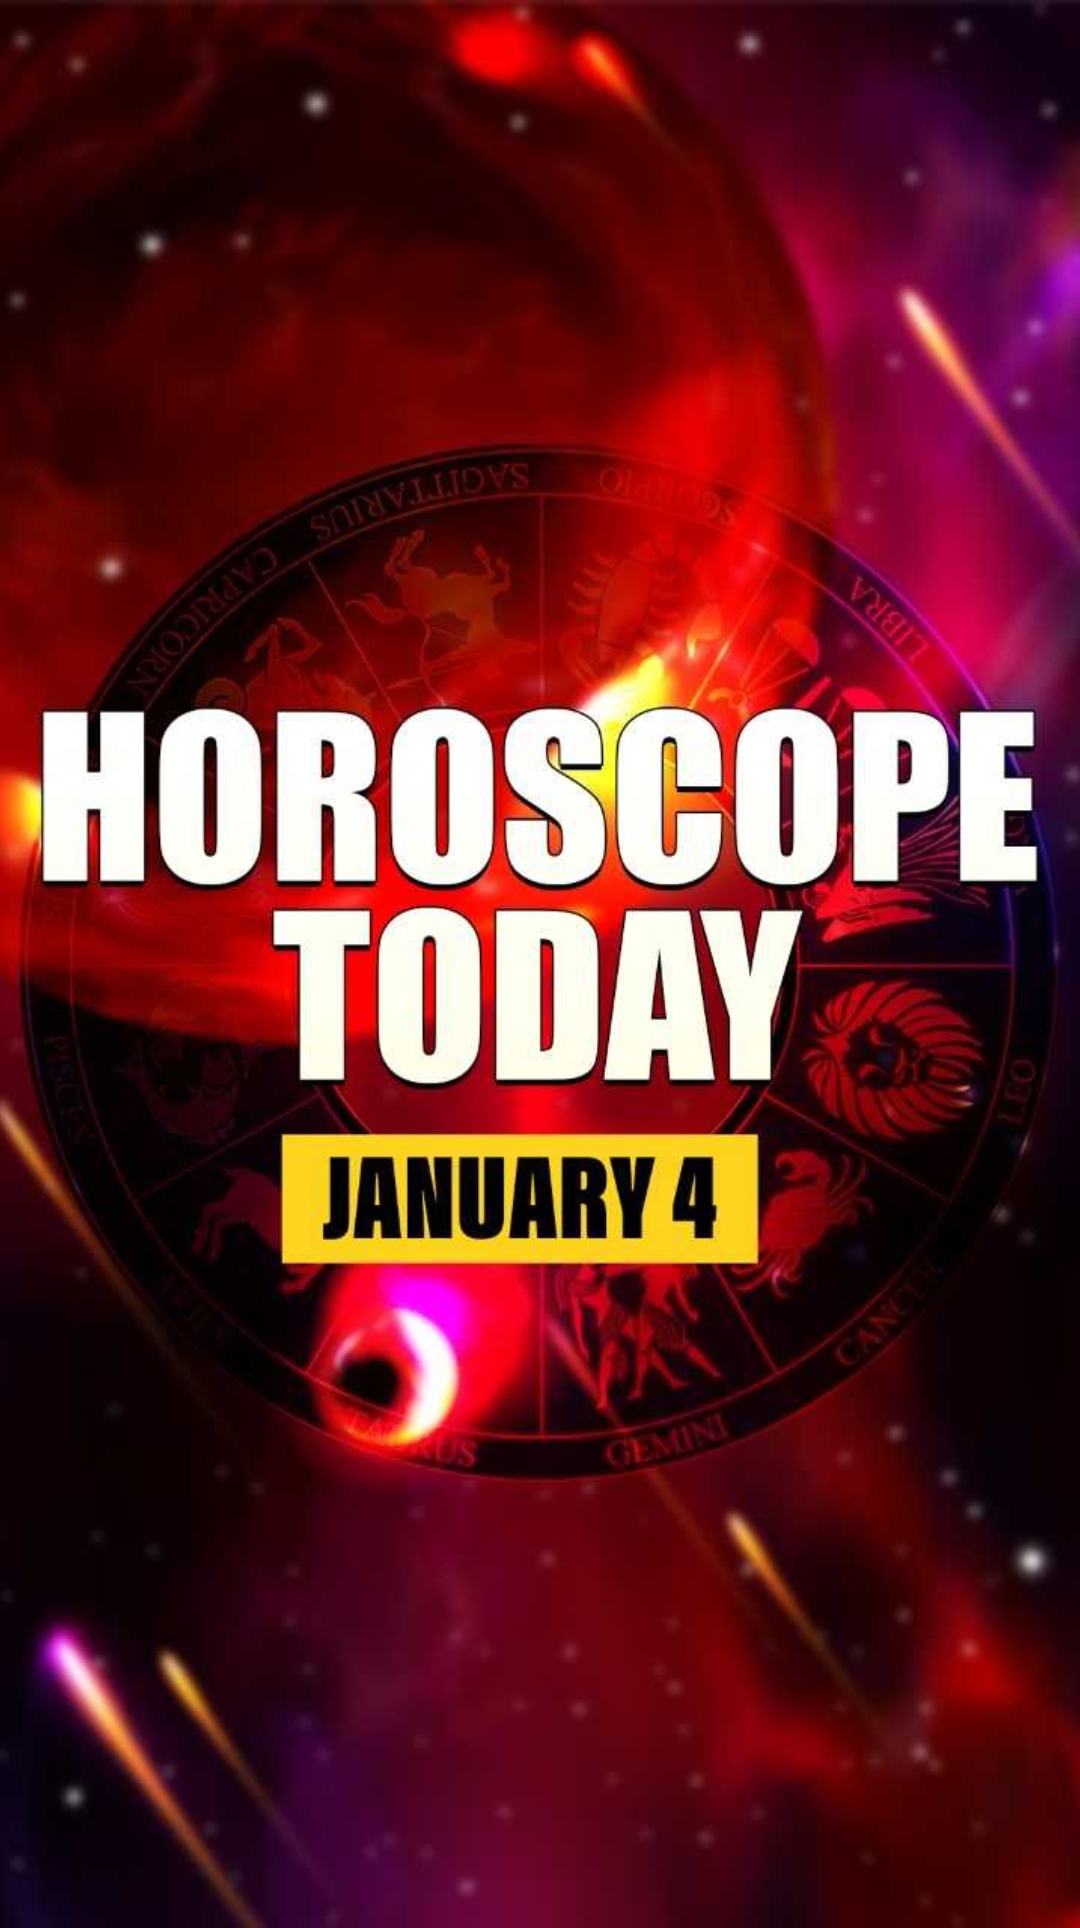 Sagittarians might meet a dear friend, know about other zodiac signs in horoscope for January 4